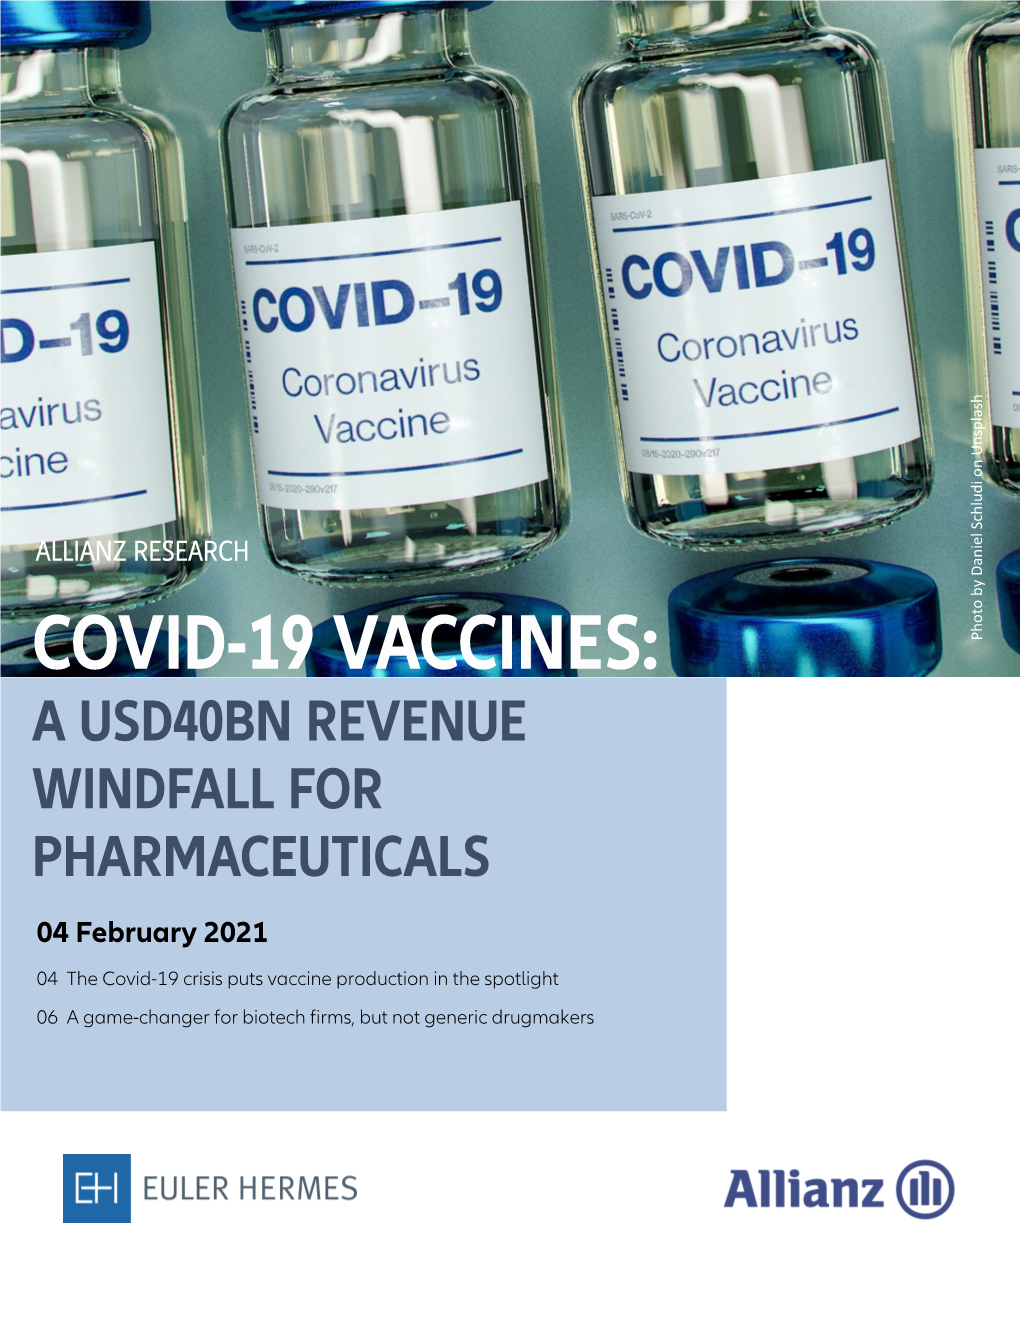 Covid-19 Vaccines: a Usd40bn Revenue Windfall for Pharmaceuticals